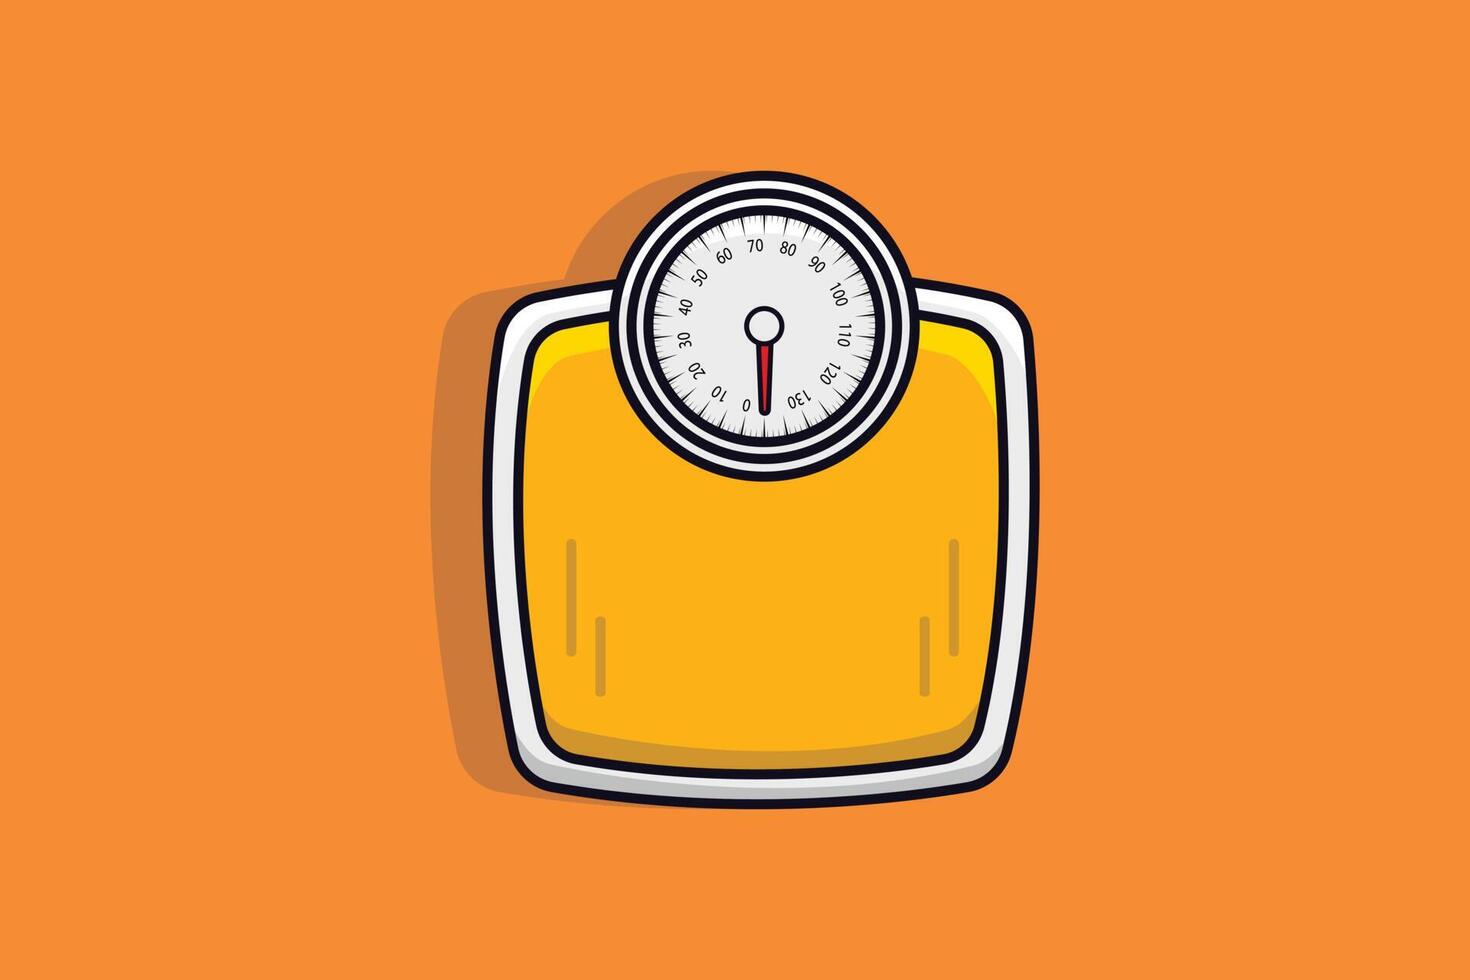 Weight Scale vector illustration. Weight checking object icon concept. Bathroom scale vector design with shadow on orange background.